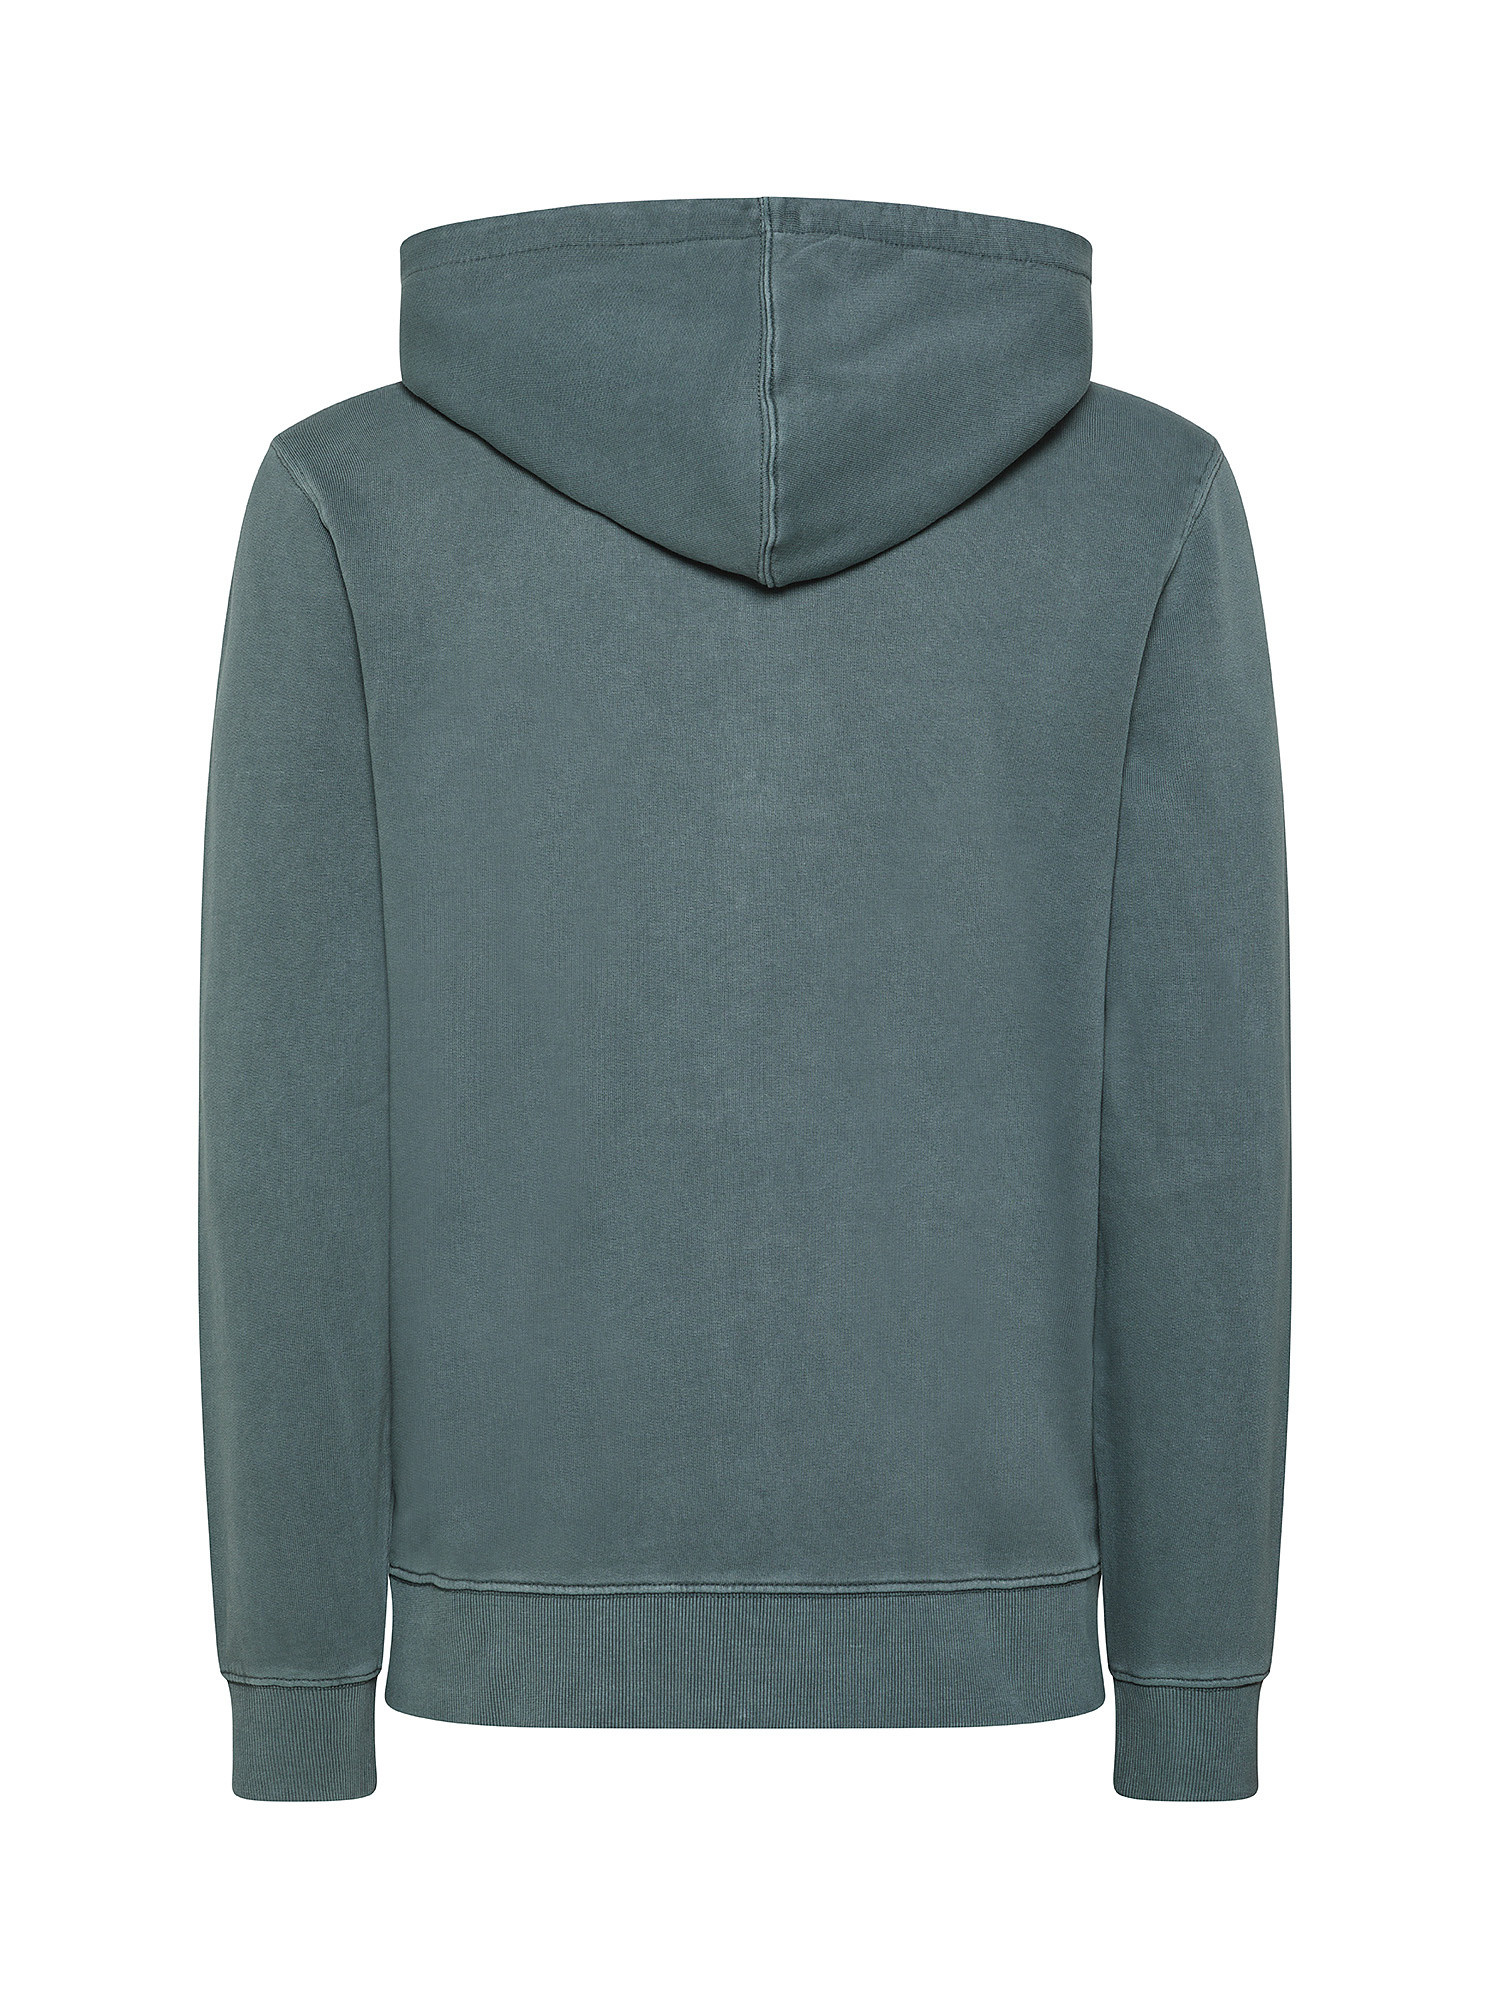 JCT - Pure cotton hooded sweatshirt, Green, large image number 1